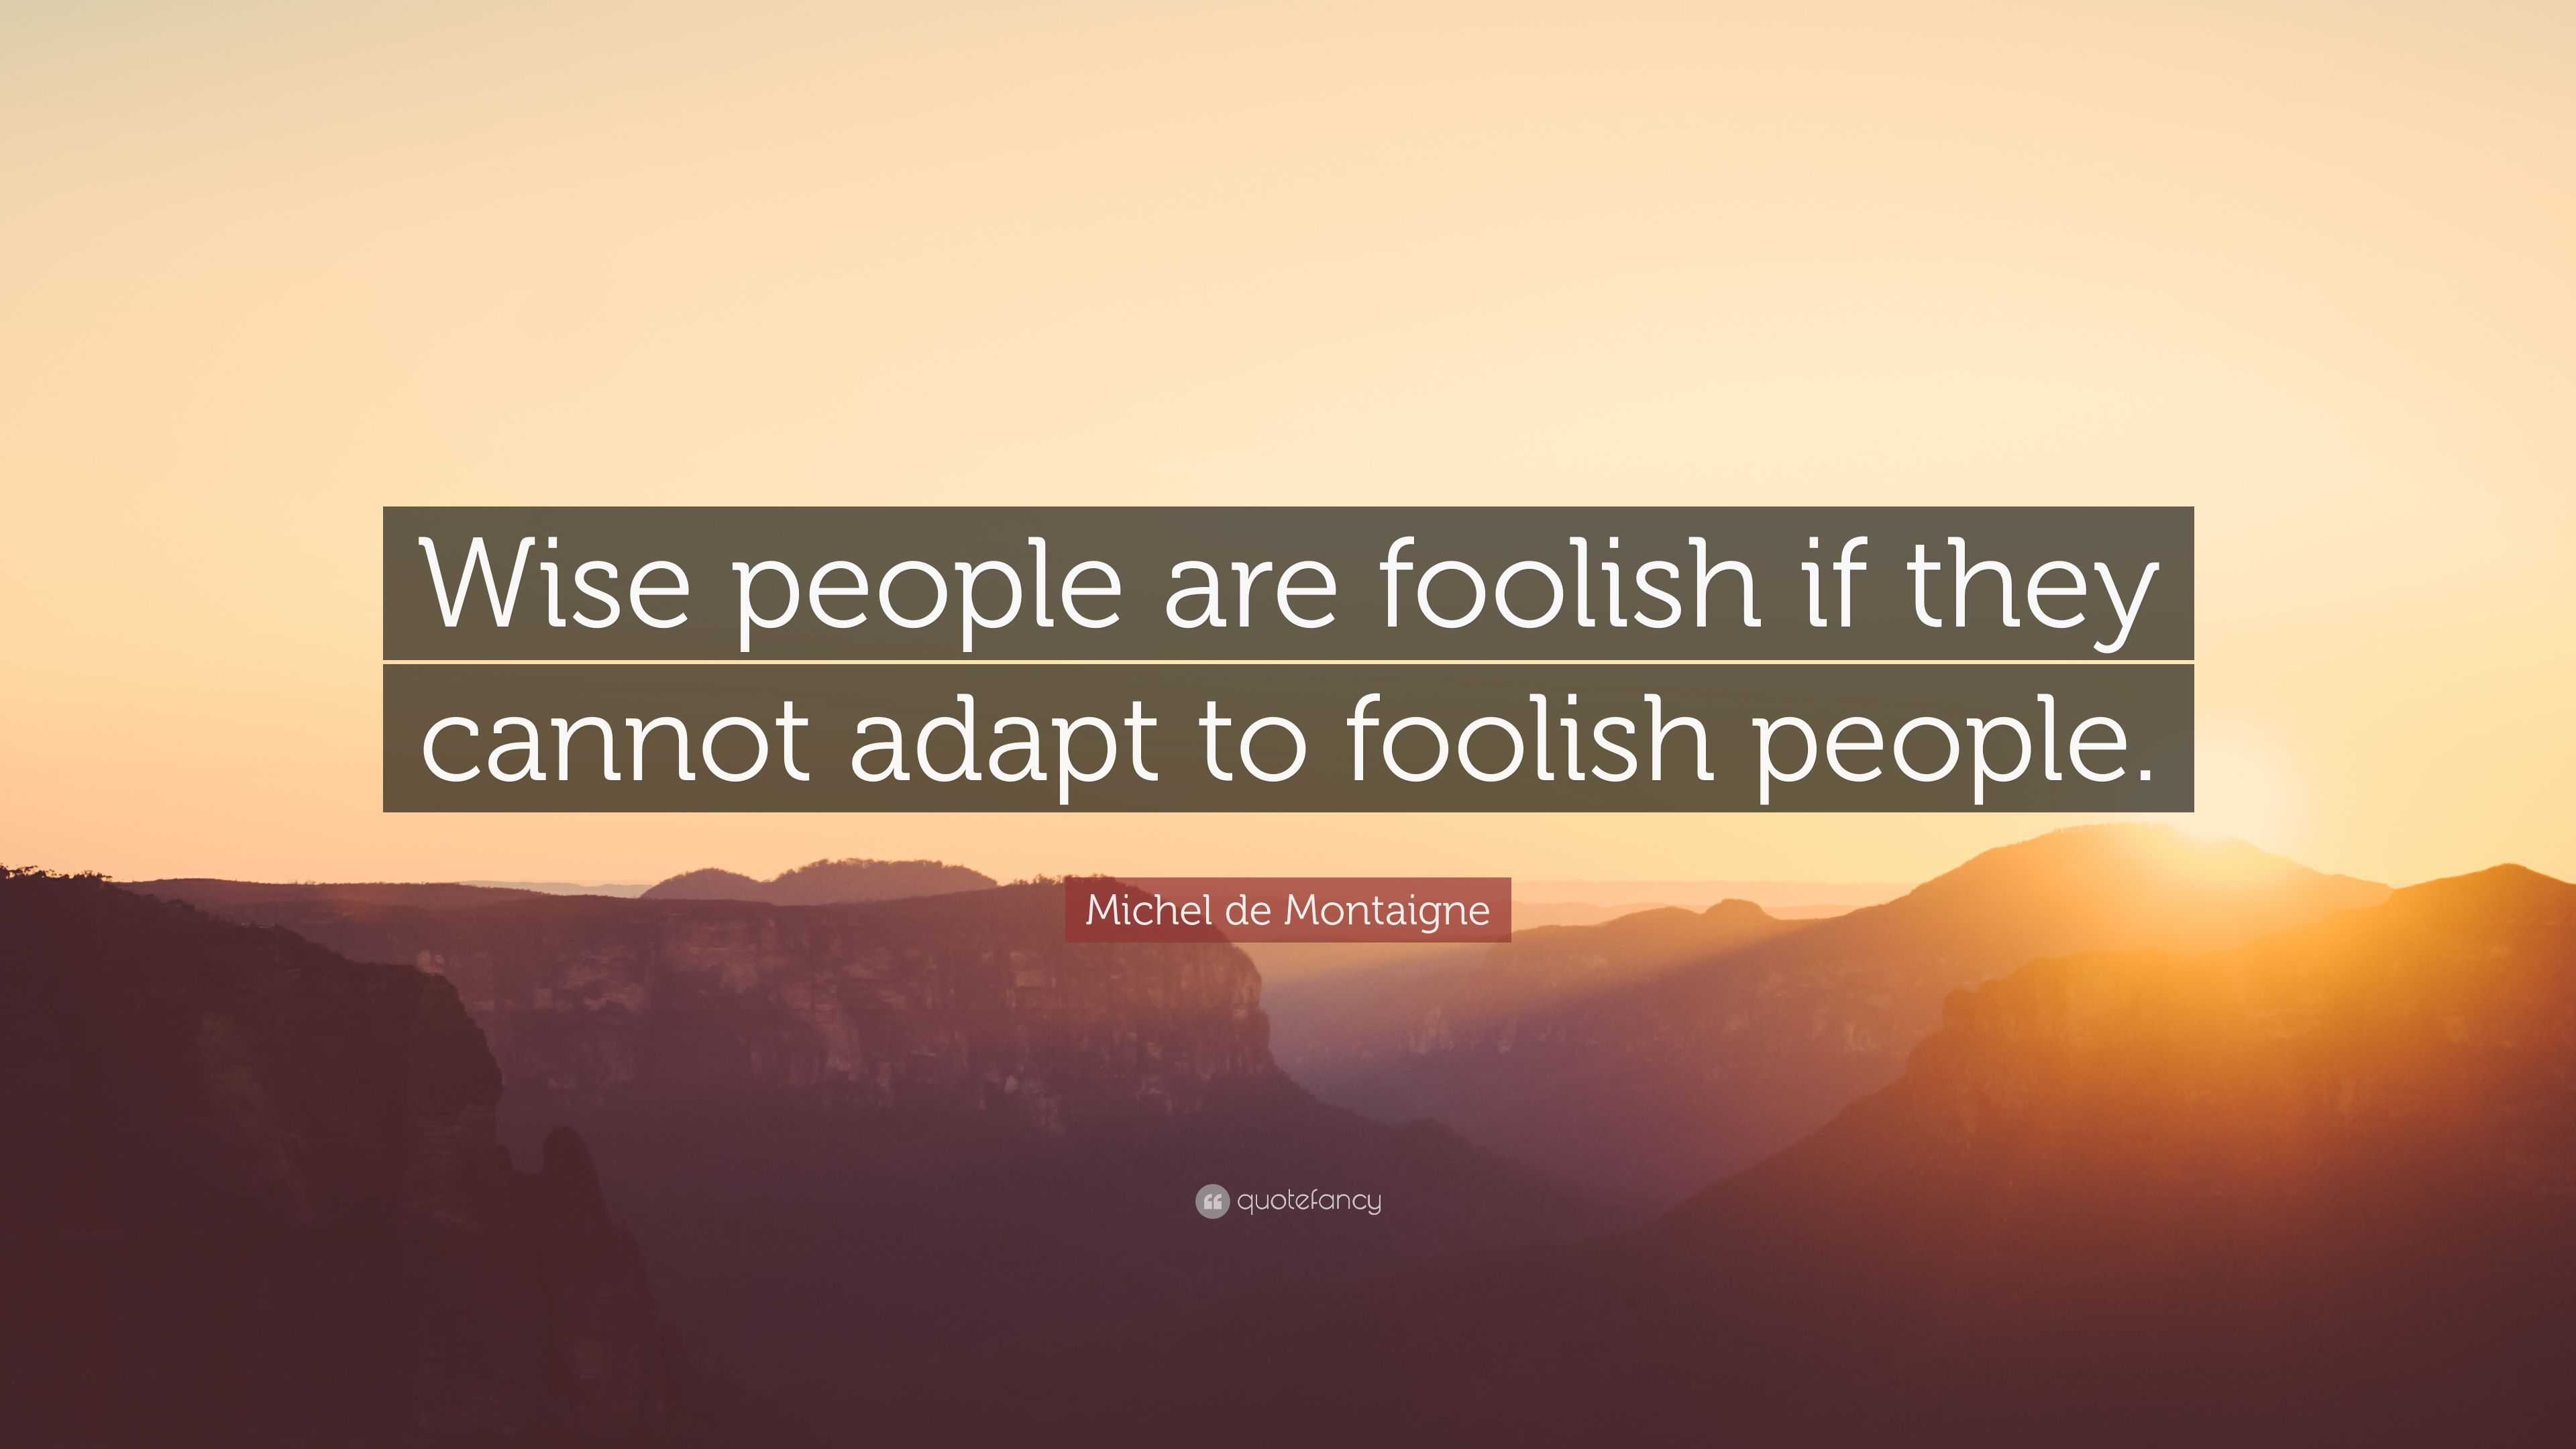 Michel De Montaigne Quote “wise People Are Foolish If They Cannot